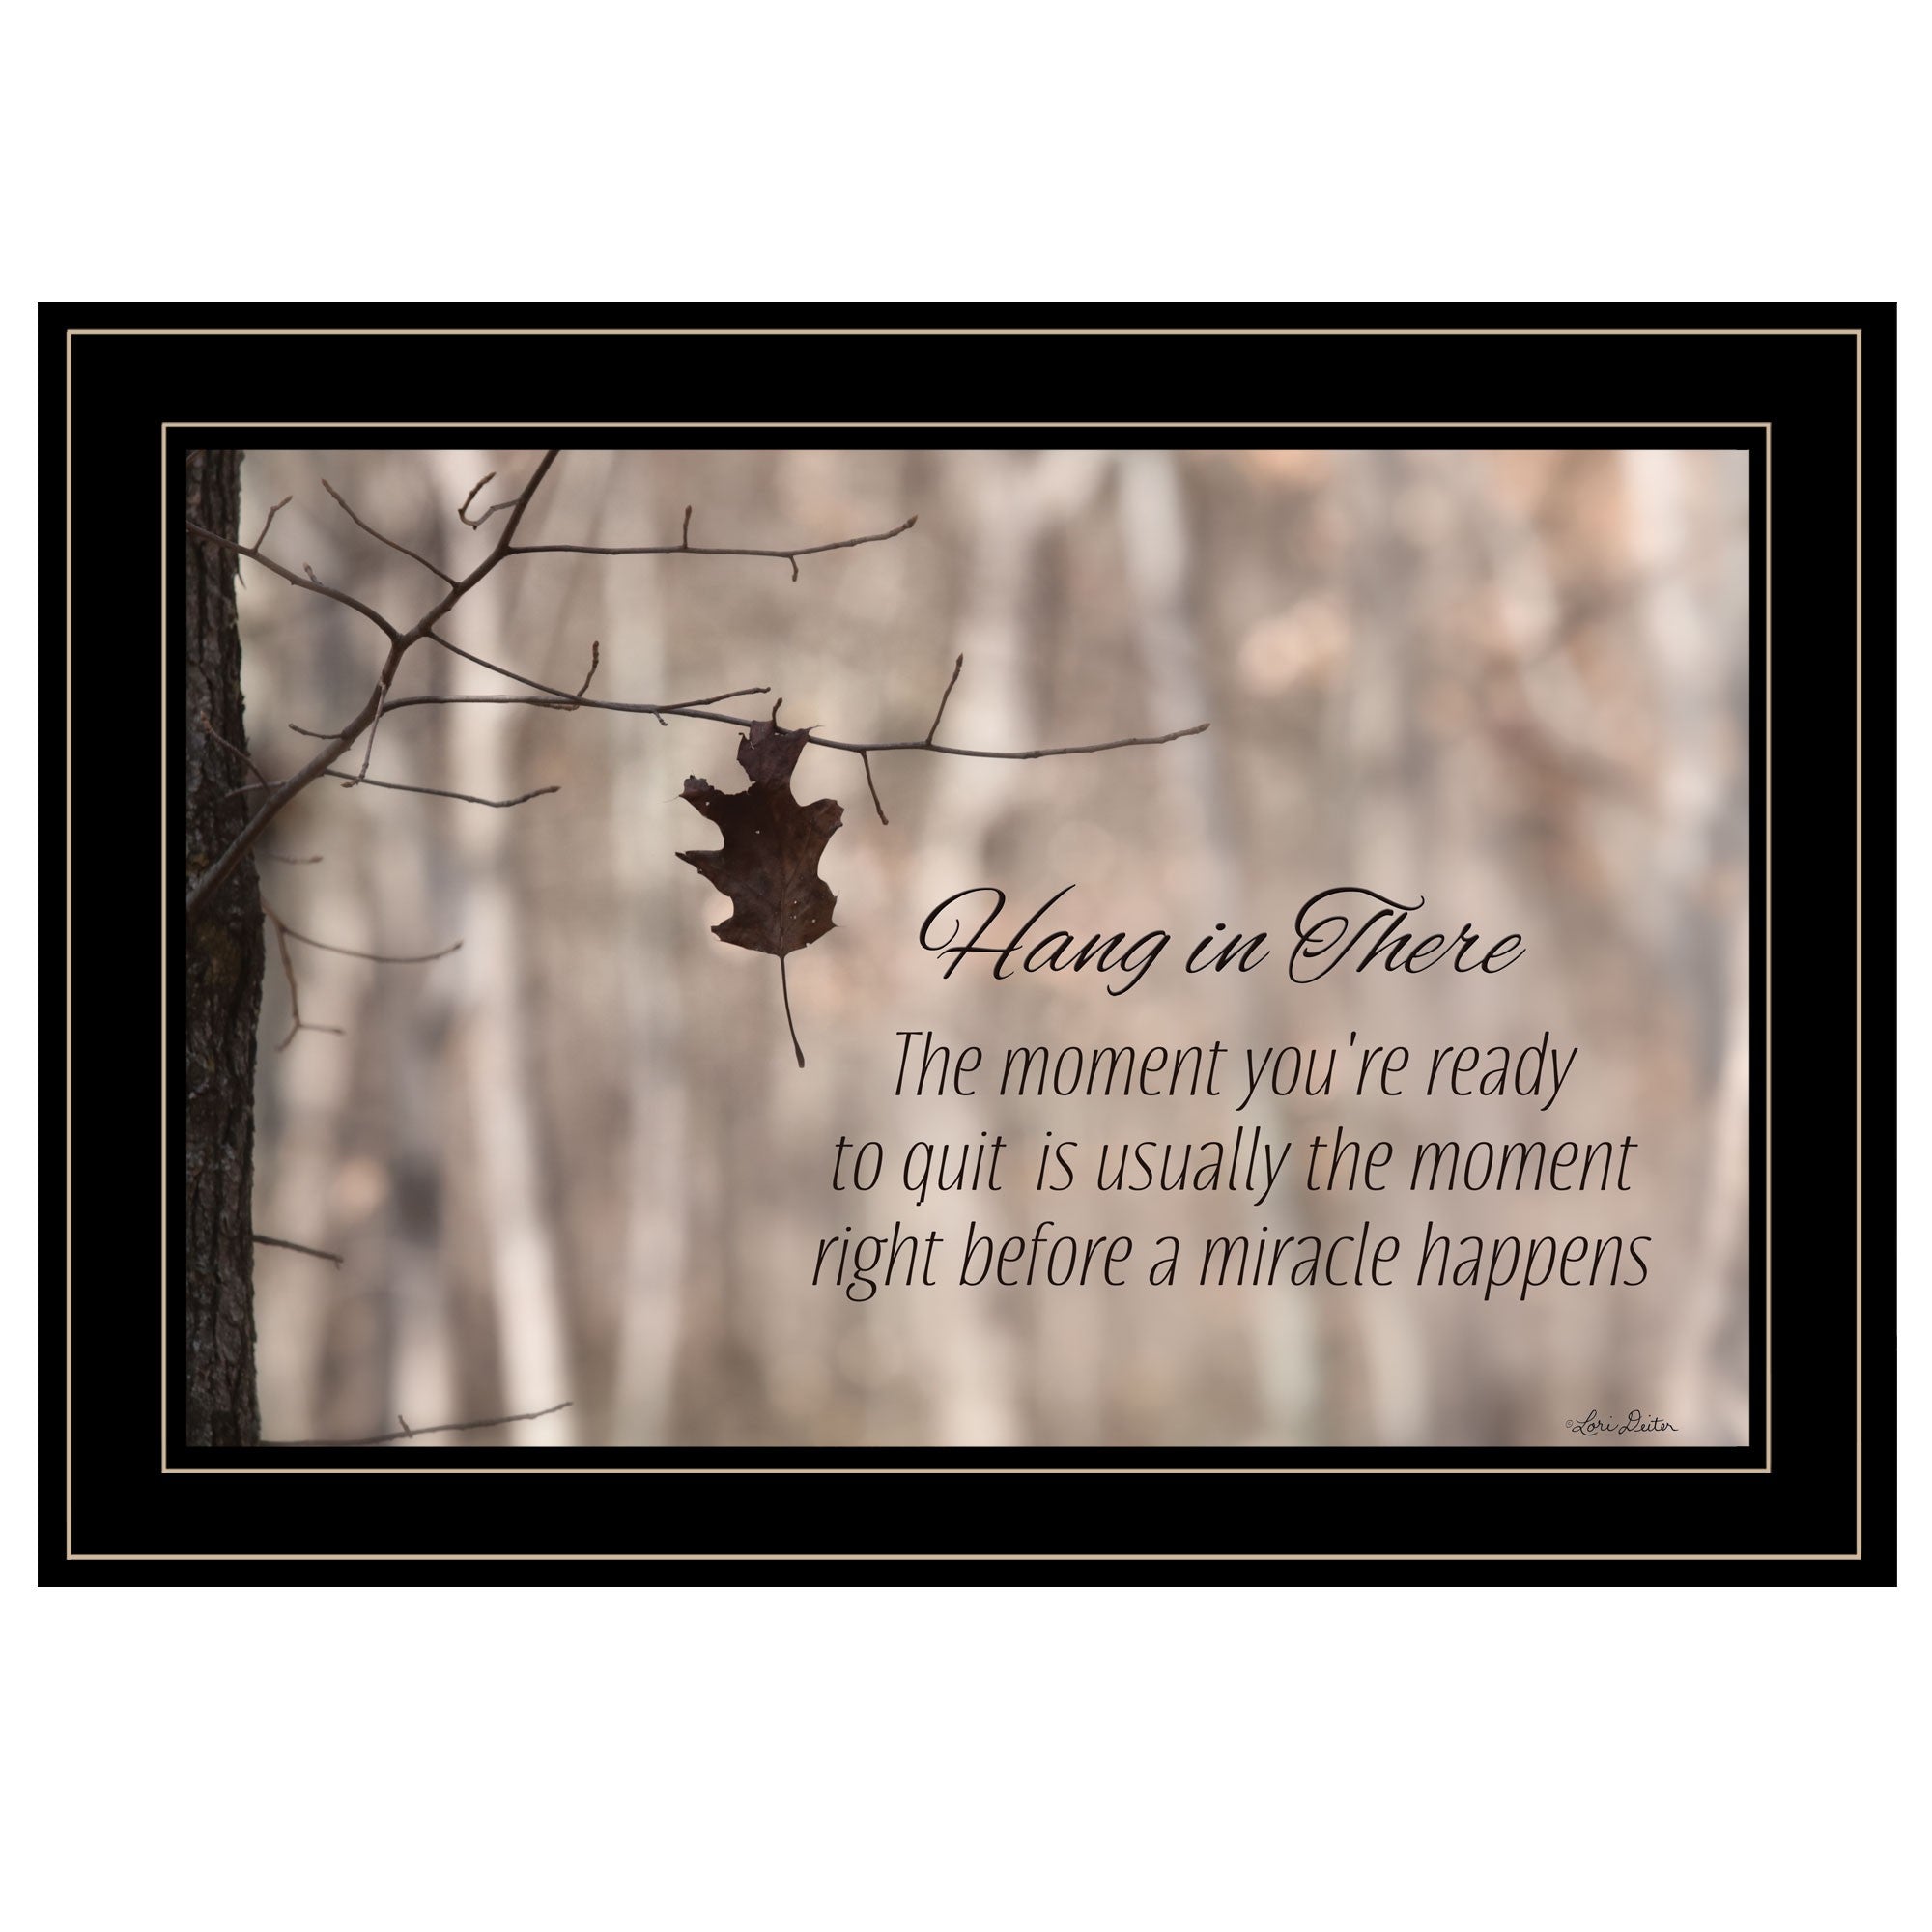 Hang in There 2 Black Framed Print Wall Art